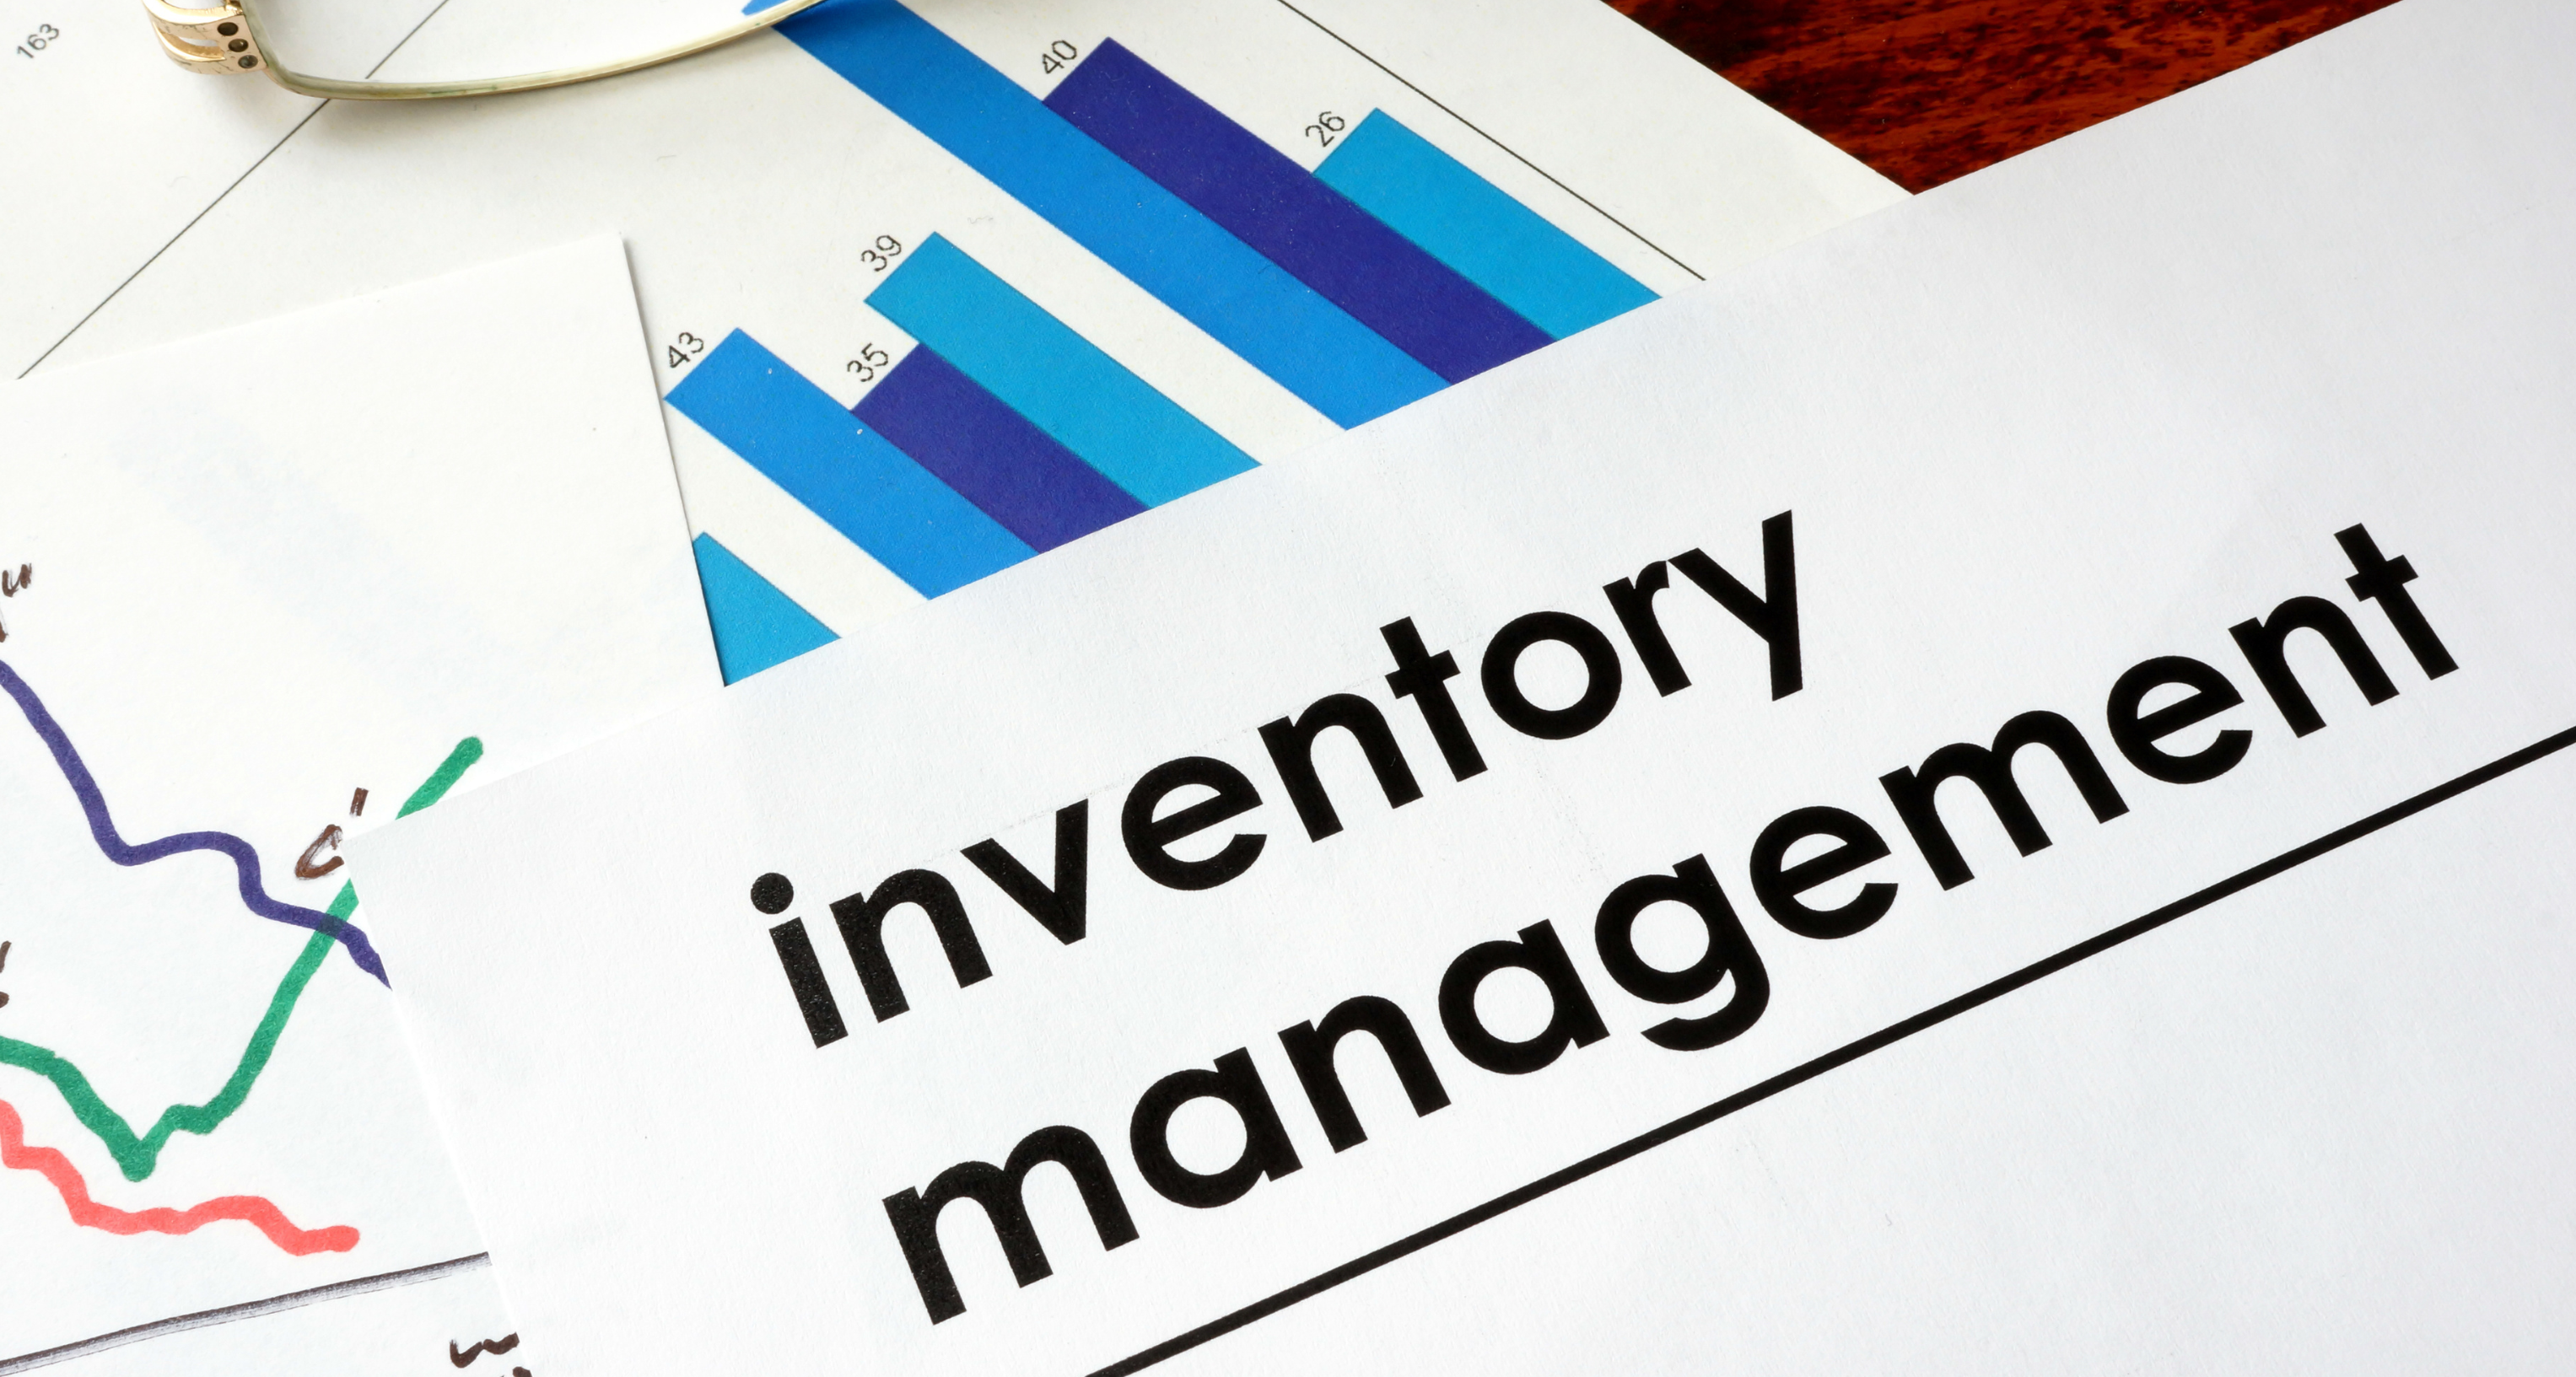 Inventory management in ecommerce fulfillment in Singapore